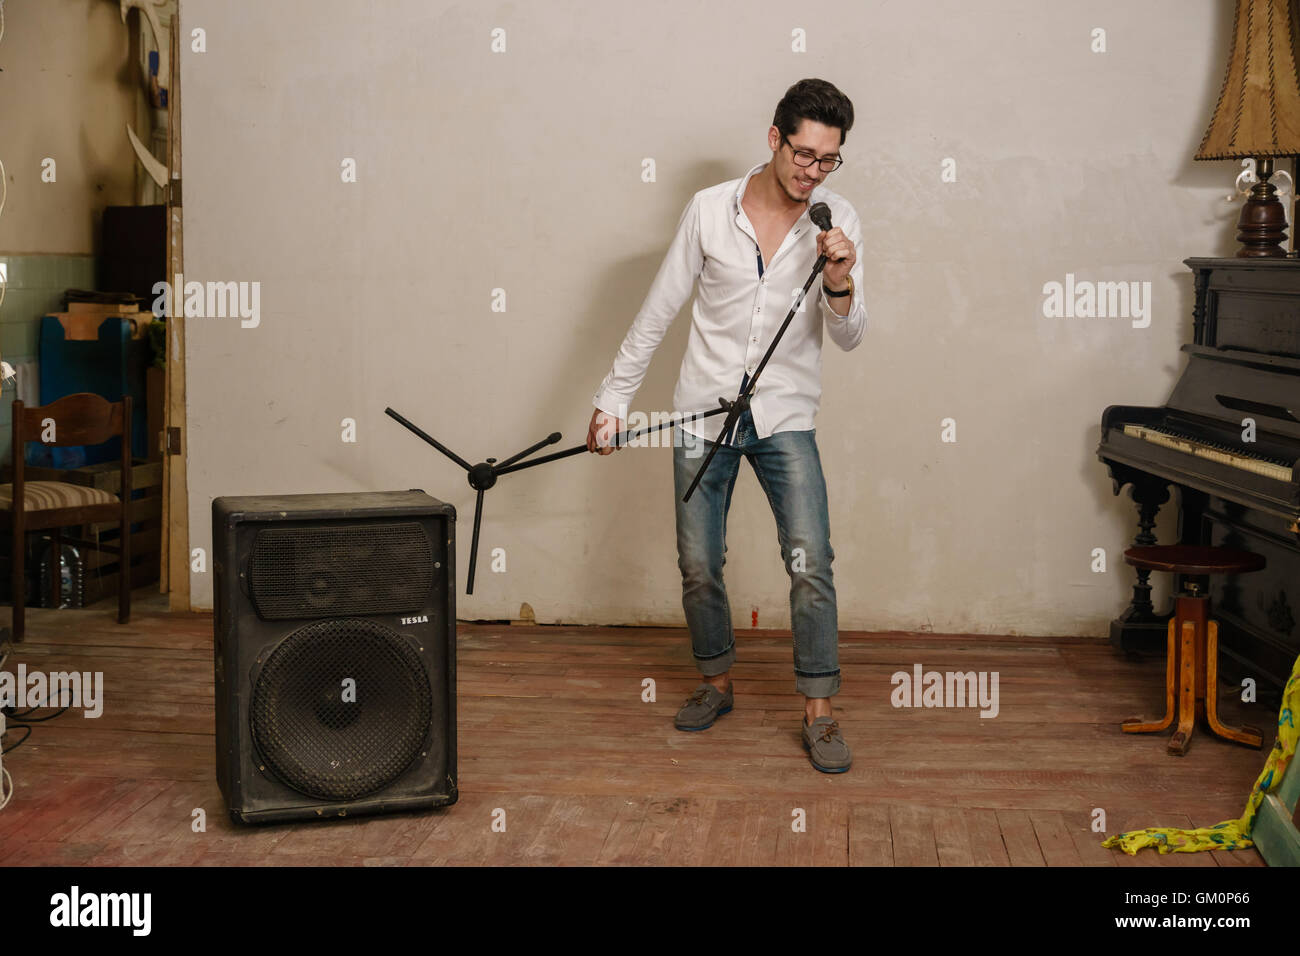 Brunet sings keeps the microphone in his hand and smiles Stock Photo